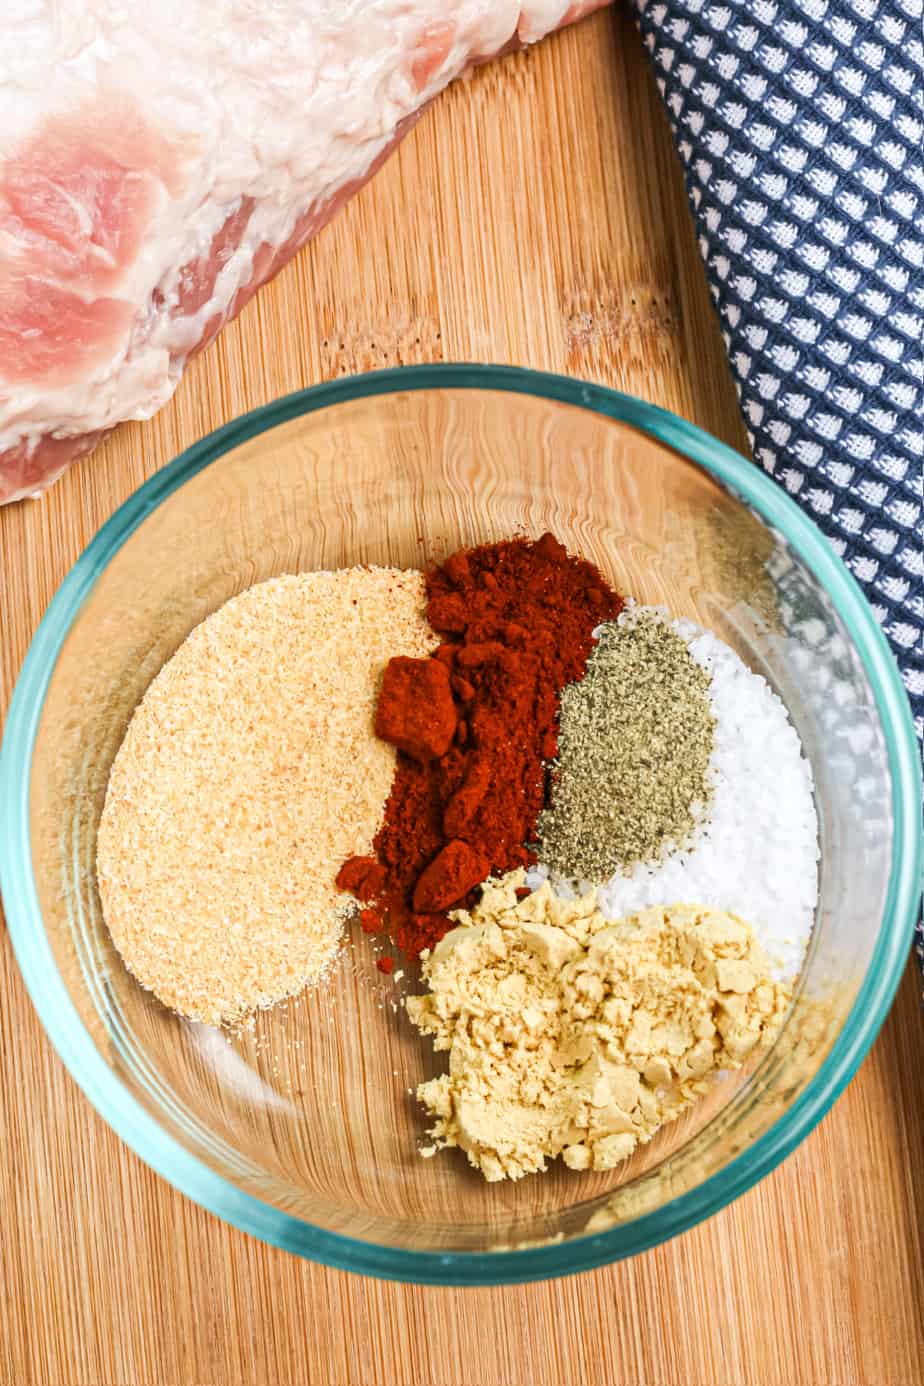 Spice rub in a bowl before mixed below a pork loin on a cutting board.